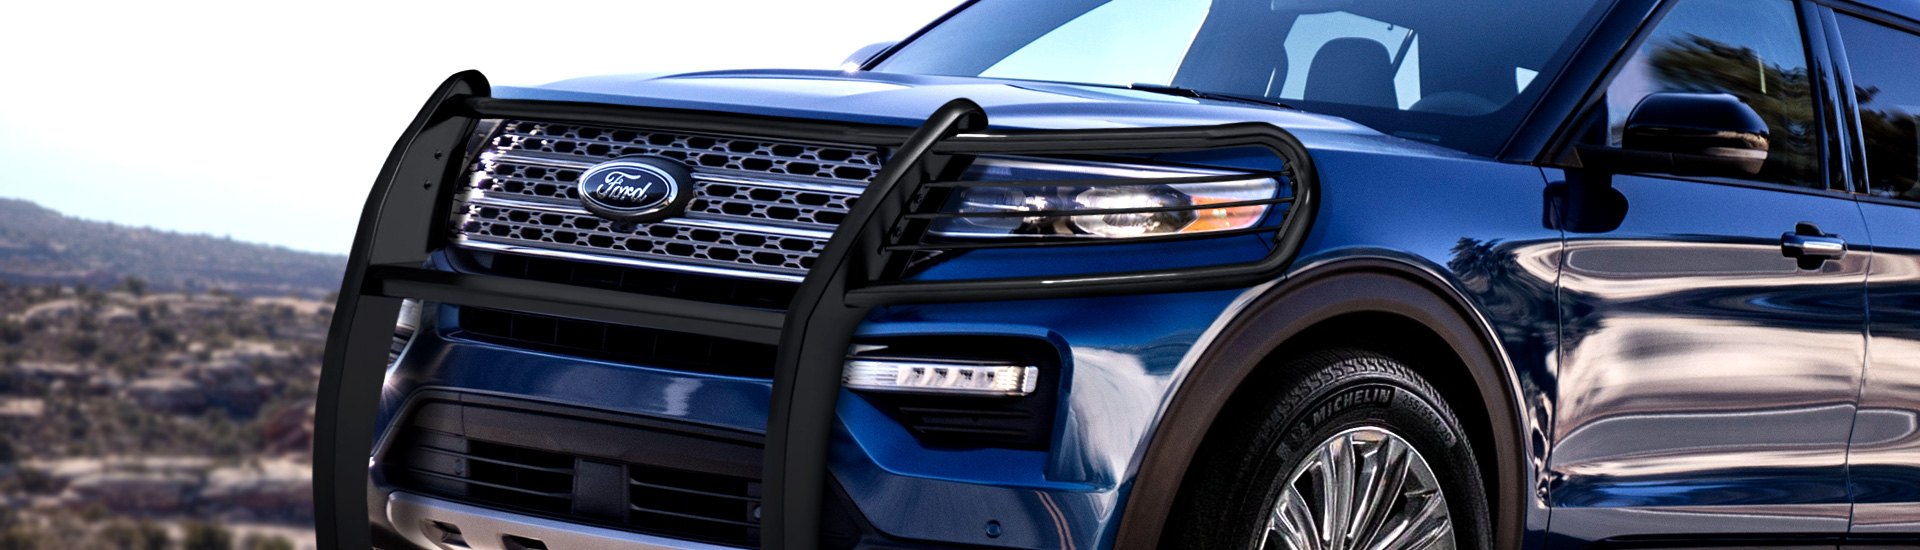 Aries Grille Guards are Now Available for 2020 Ford Explorer